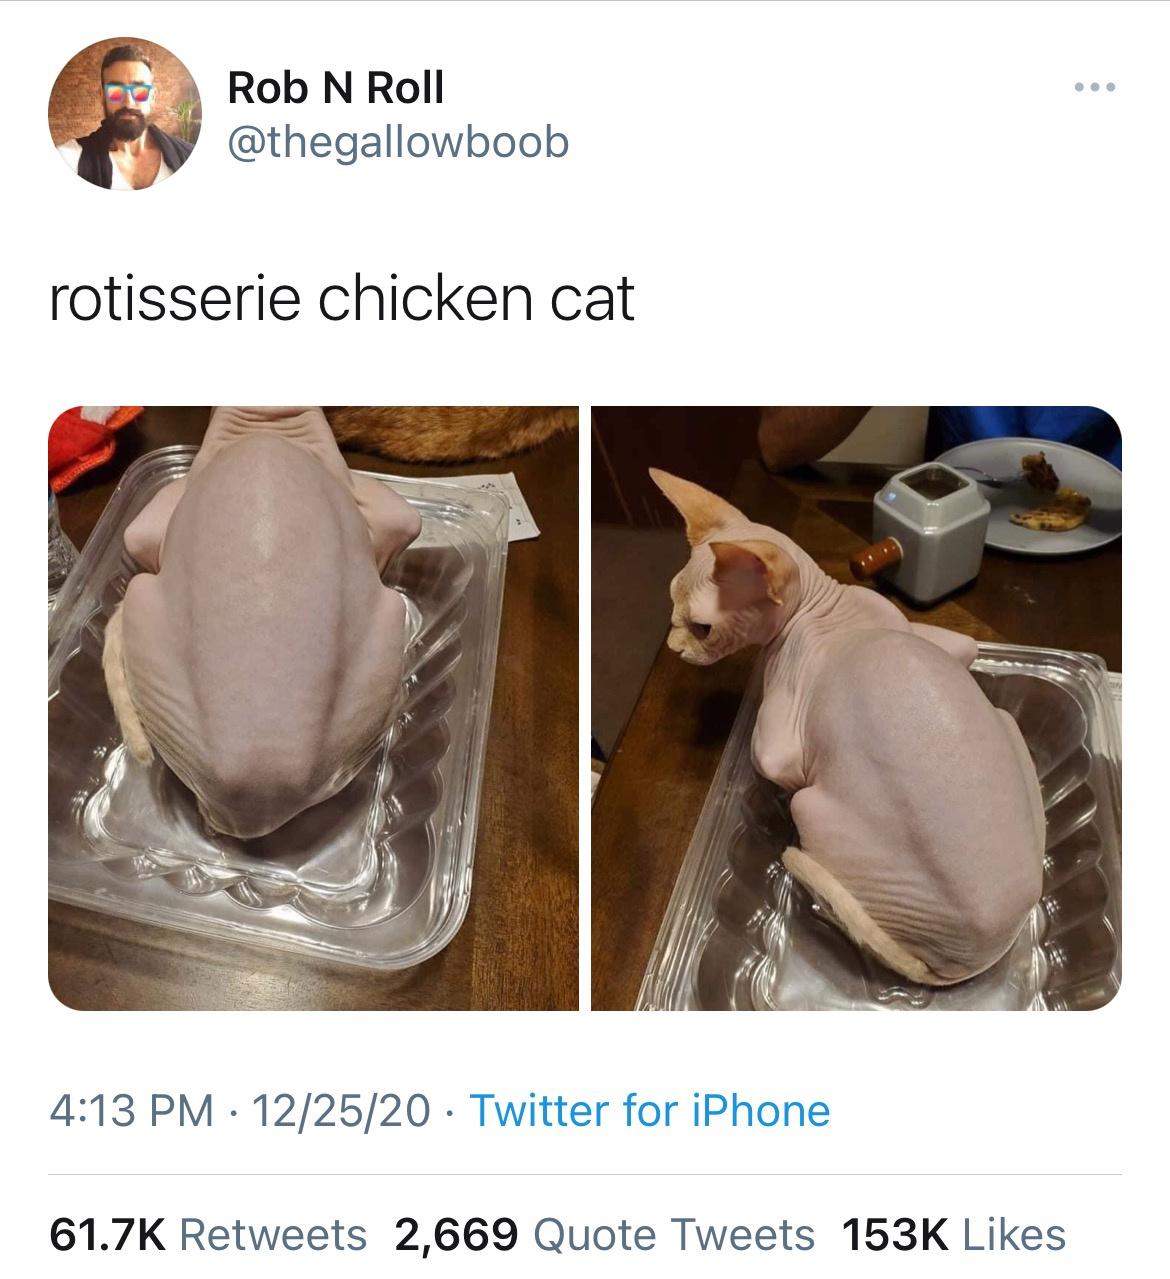 rotisserie chicken cat - Rob N Roll rotisserie chicken cat 122520 Twitter for iPhone 2,669 Quote Tweets